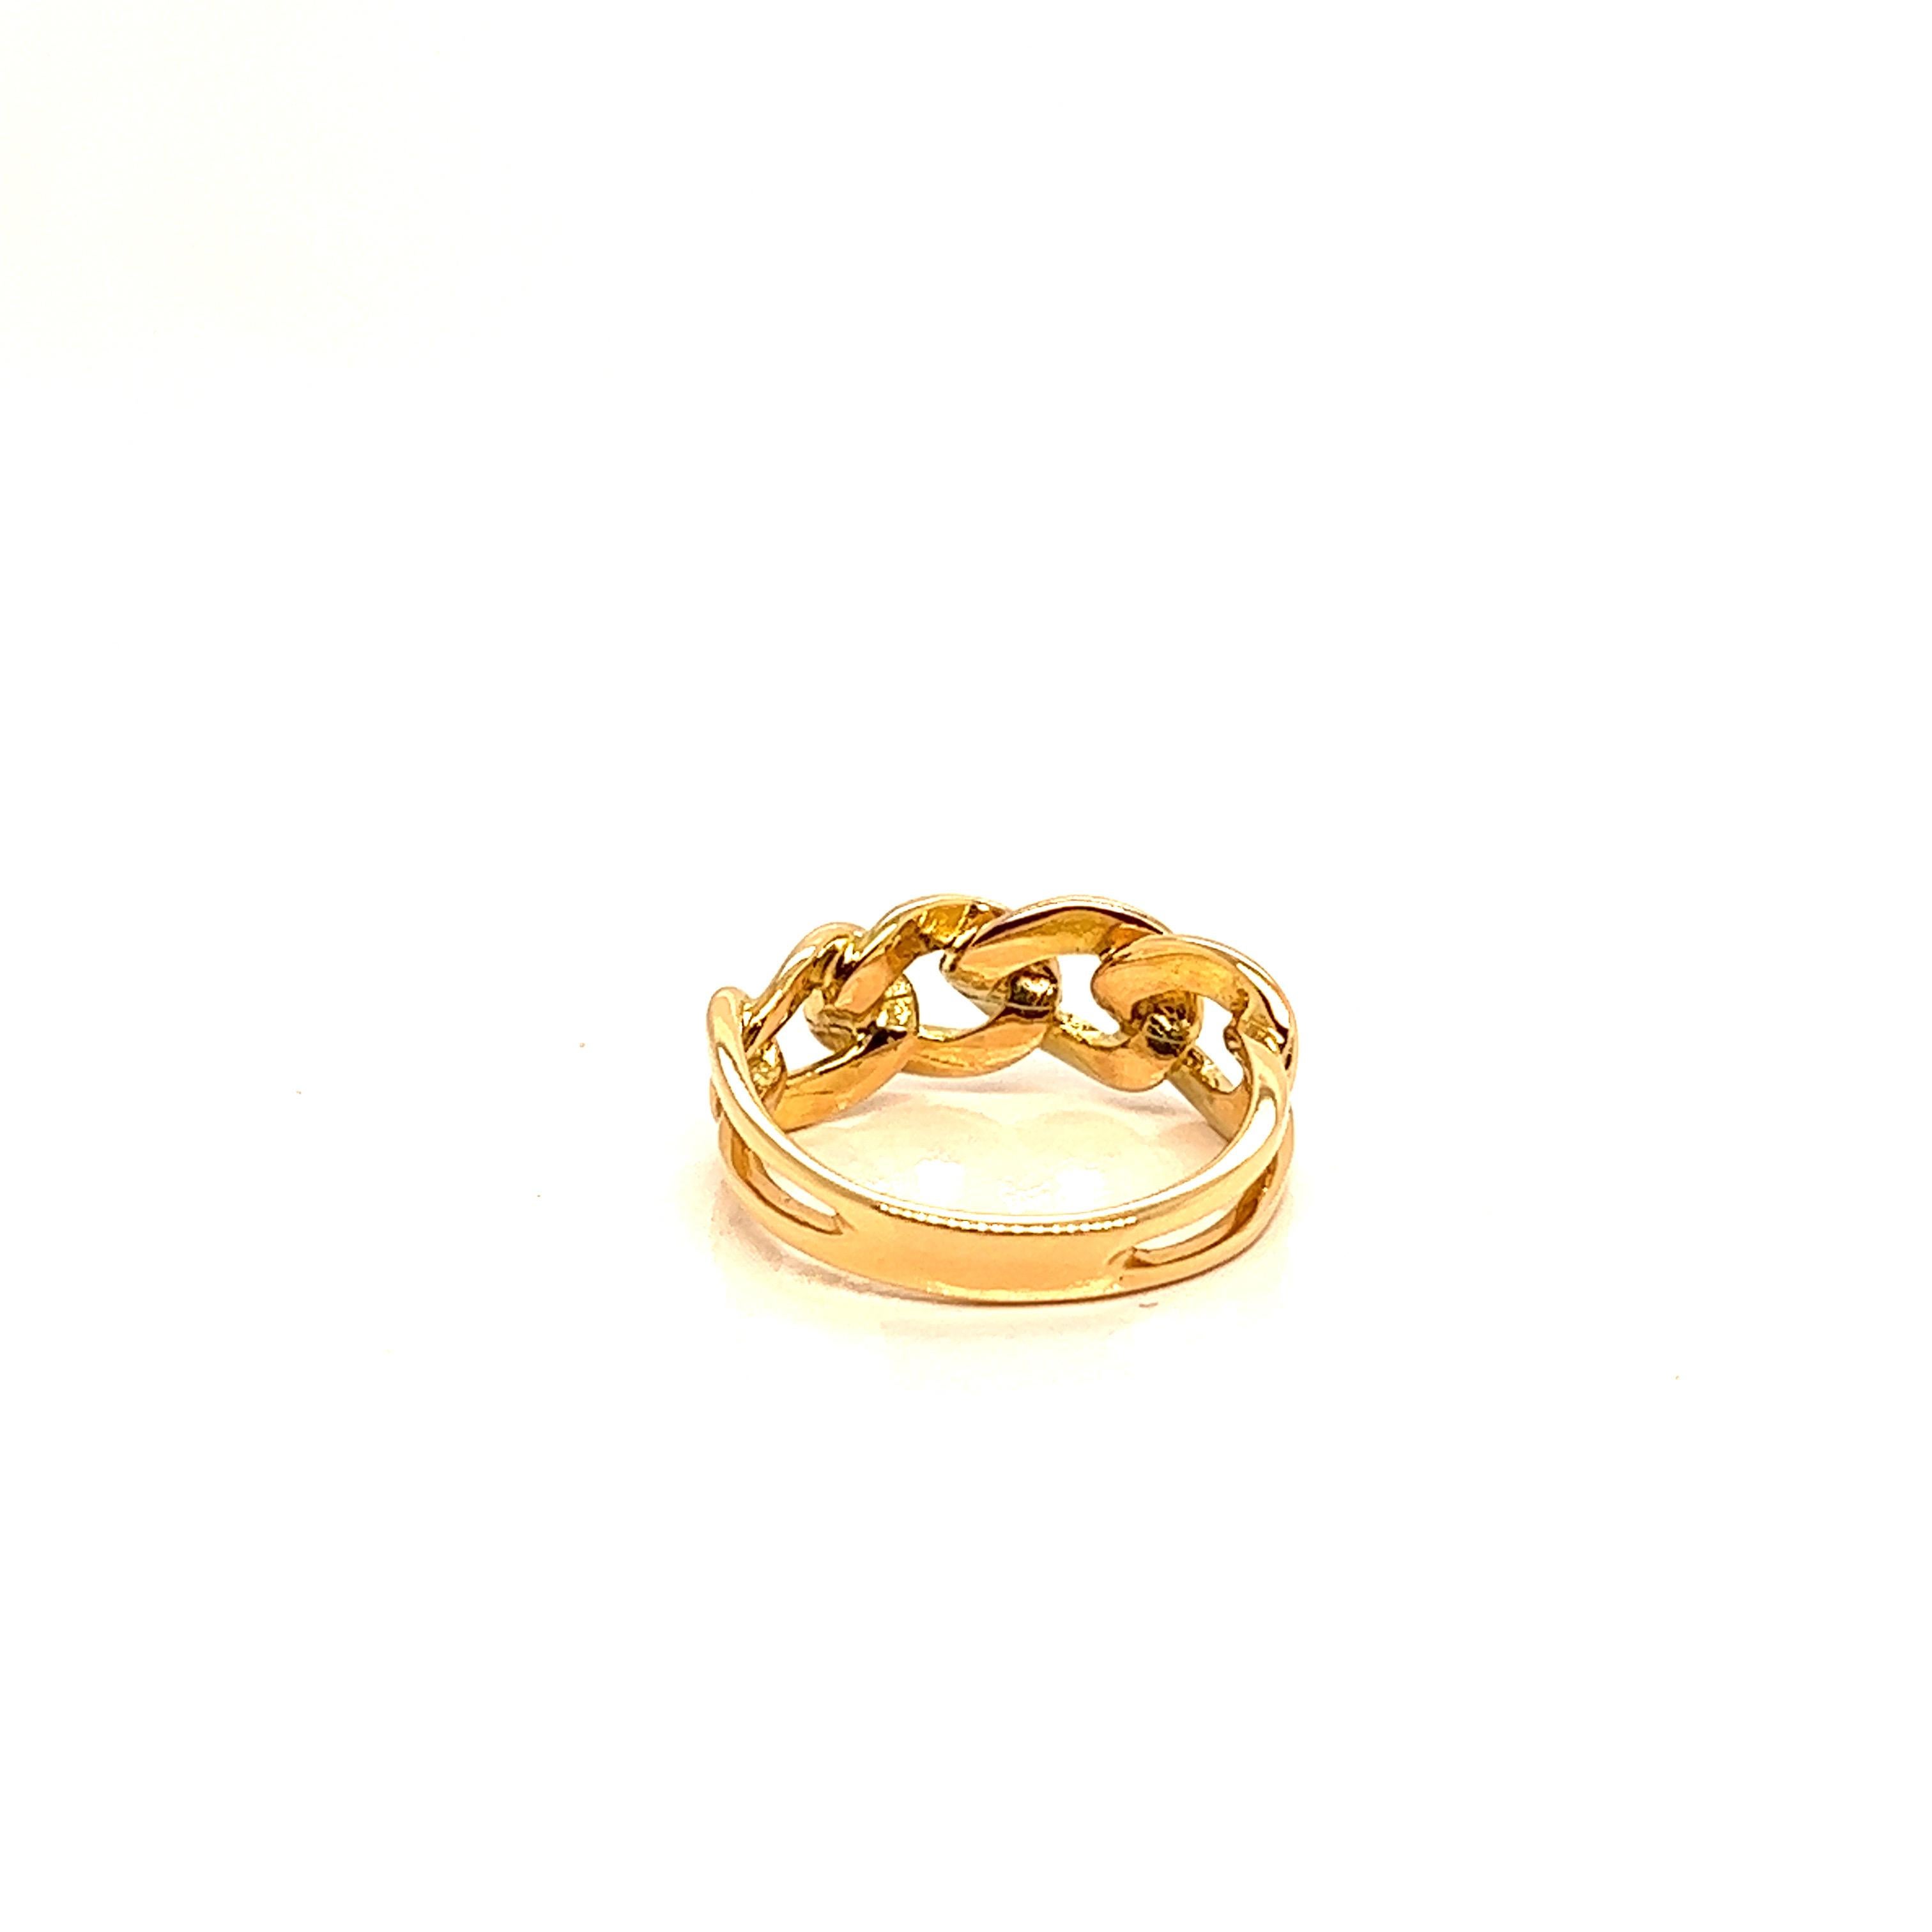 Discover this magnificent French ring in 18-carat yellow gold, a jewel of unparalleled elegance. With its four small braided rings, this ring is a true masterpiece of French craftsmanship. Its delicate, sophisticated design makes it the perfect